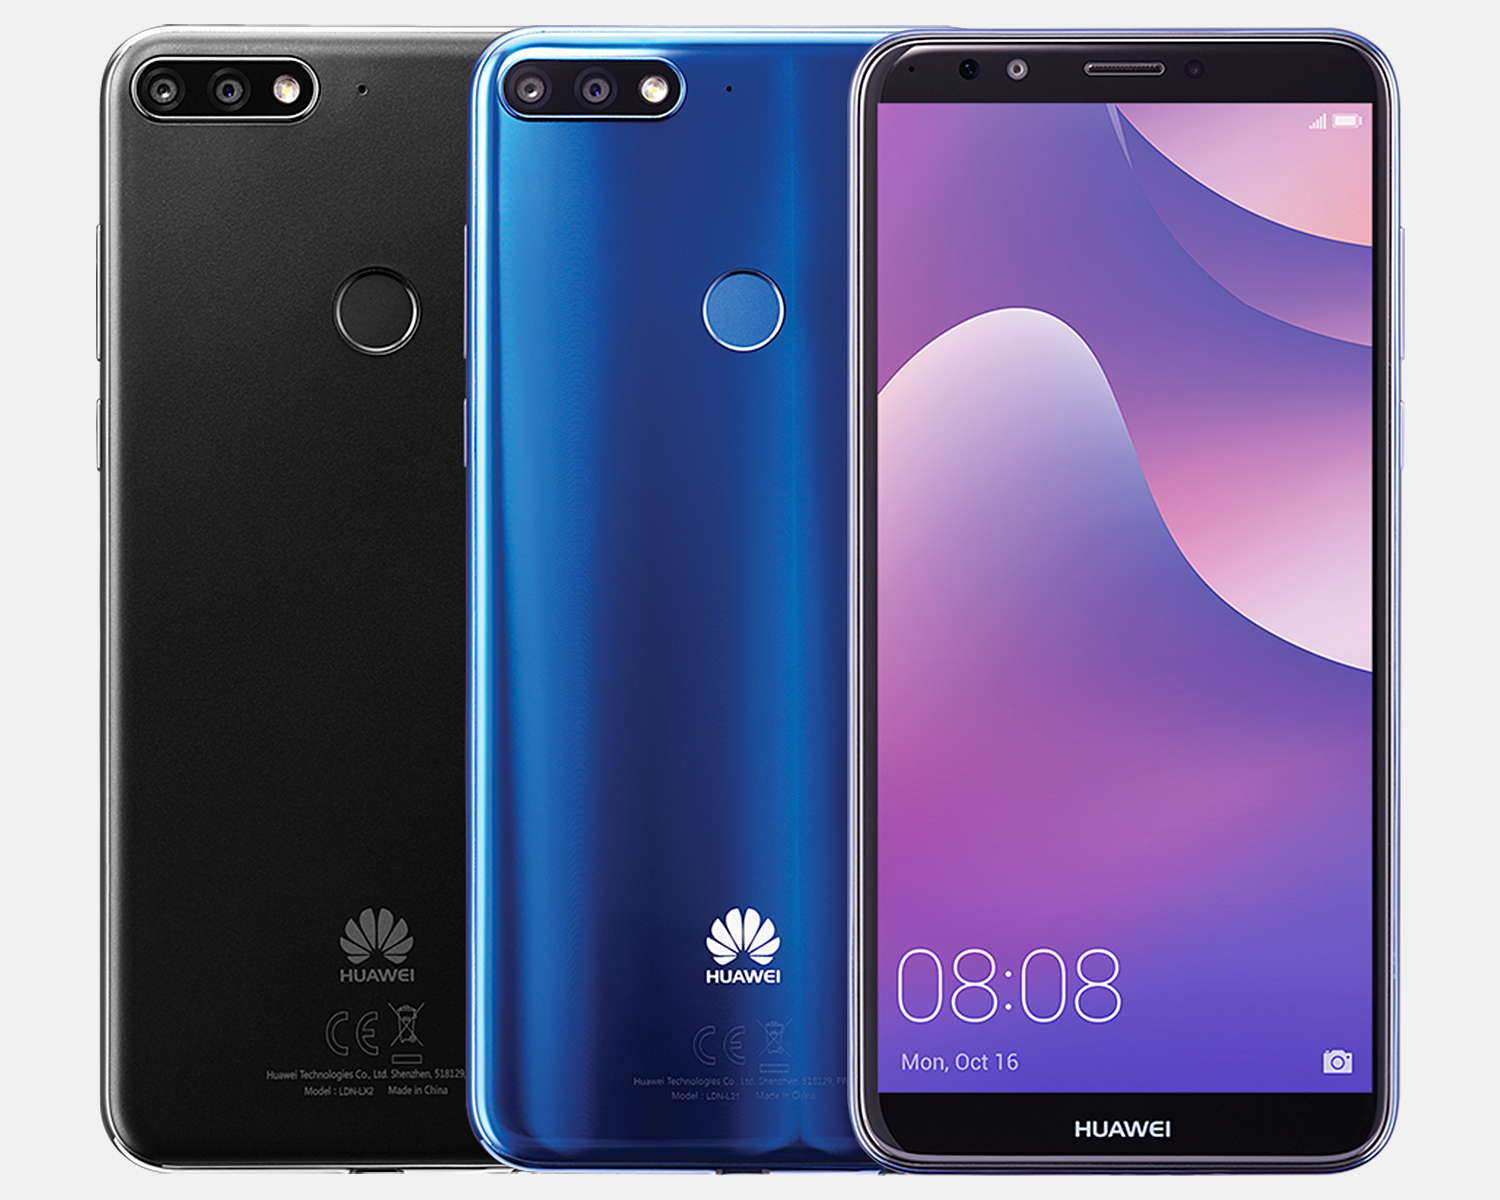 New Arrival Huawei Nova 2 Lite Entry Android Smartphone Tech